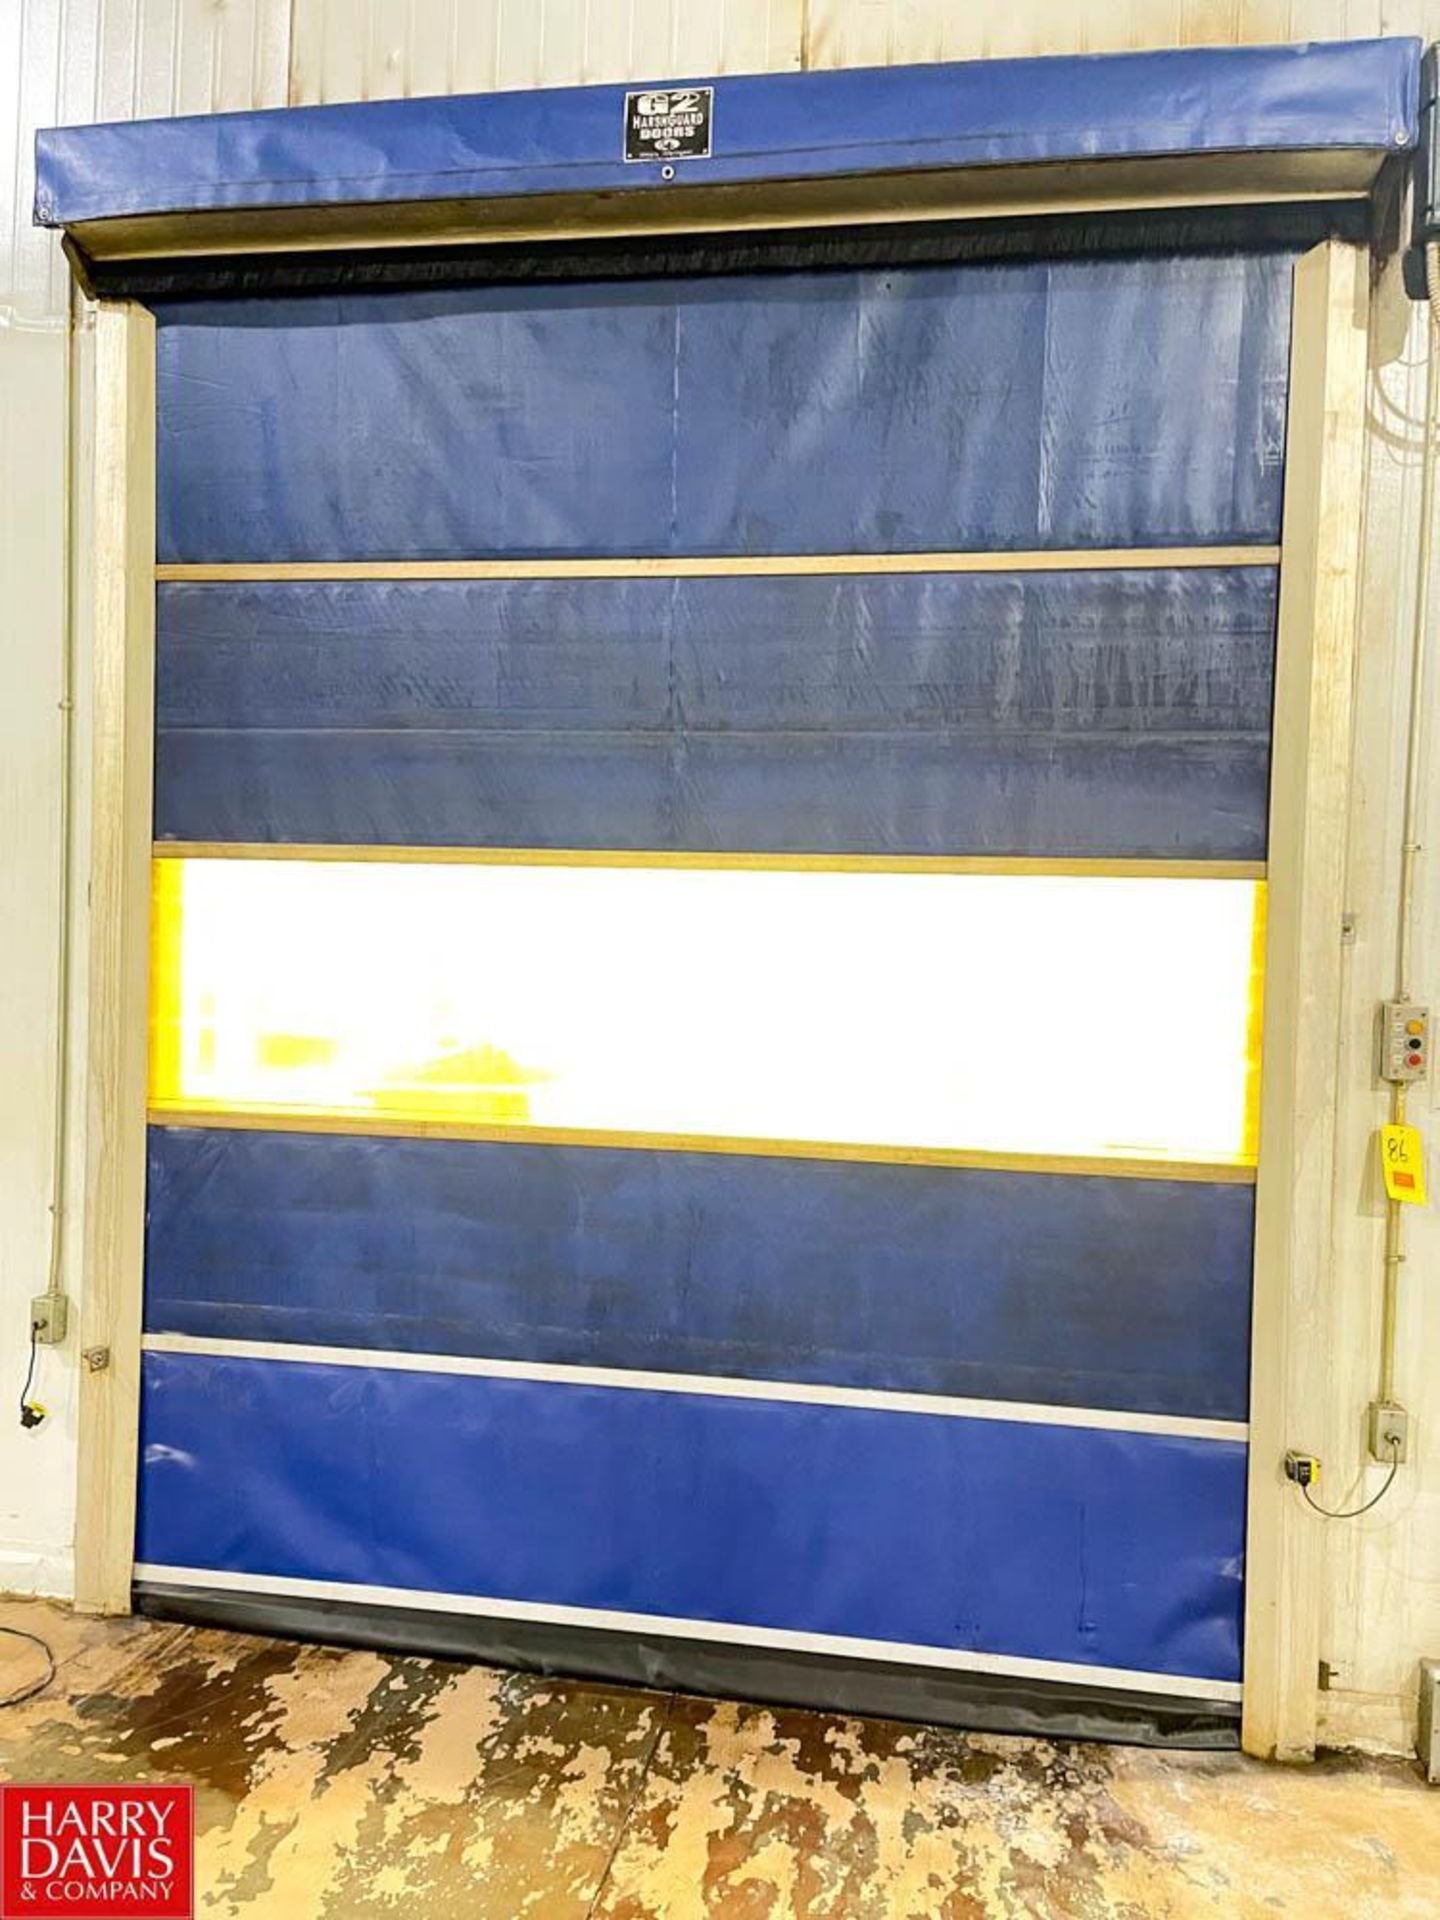 G2 Harsh Guard High Speed Roll-Up Door, Dimensions = 120" Width x 117" Height - Rigging Fee: $1000